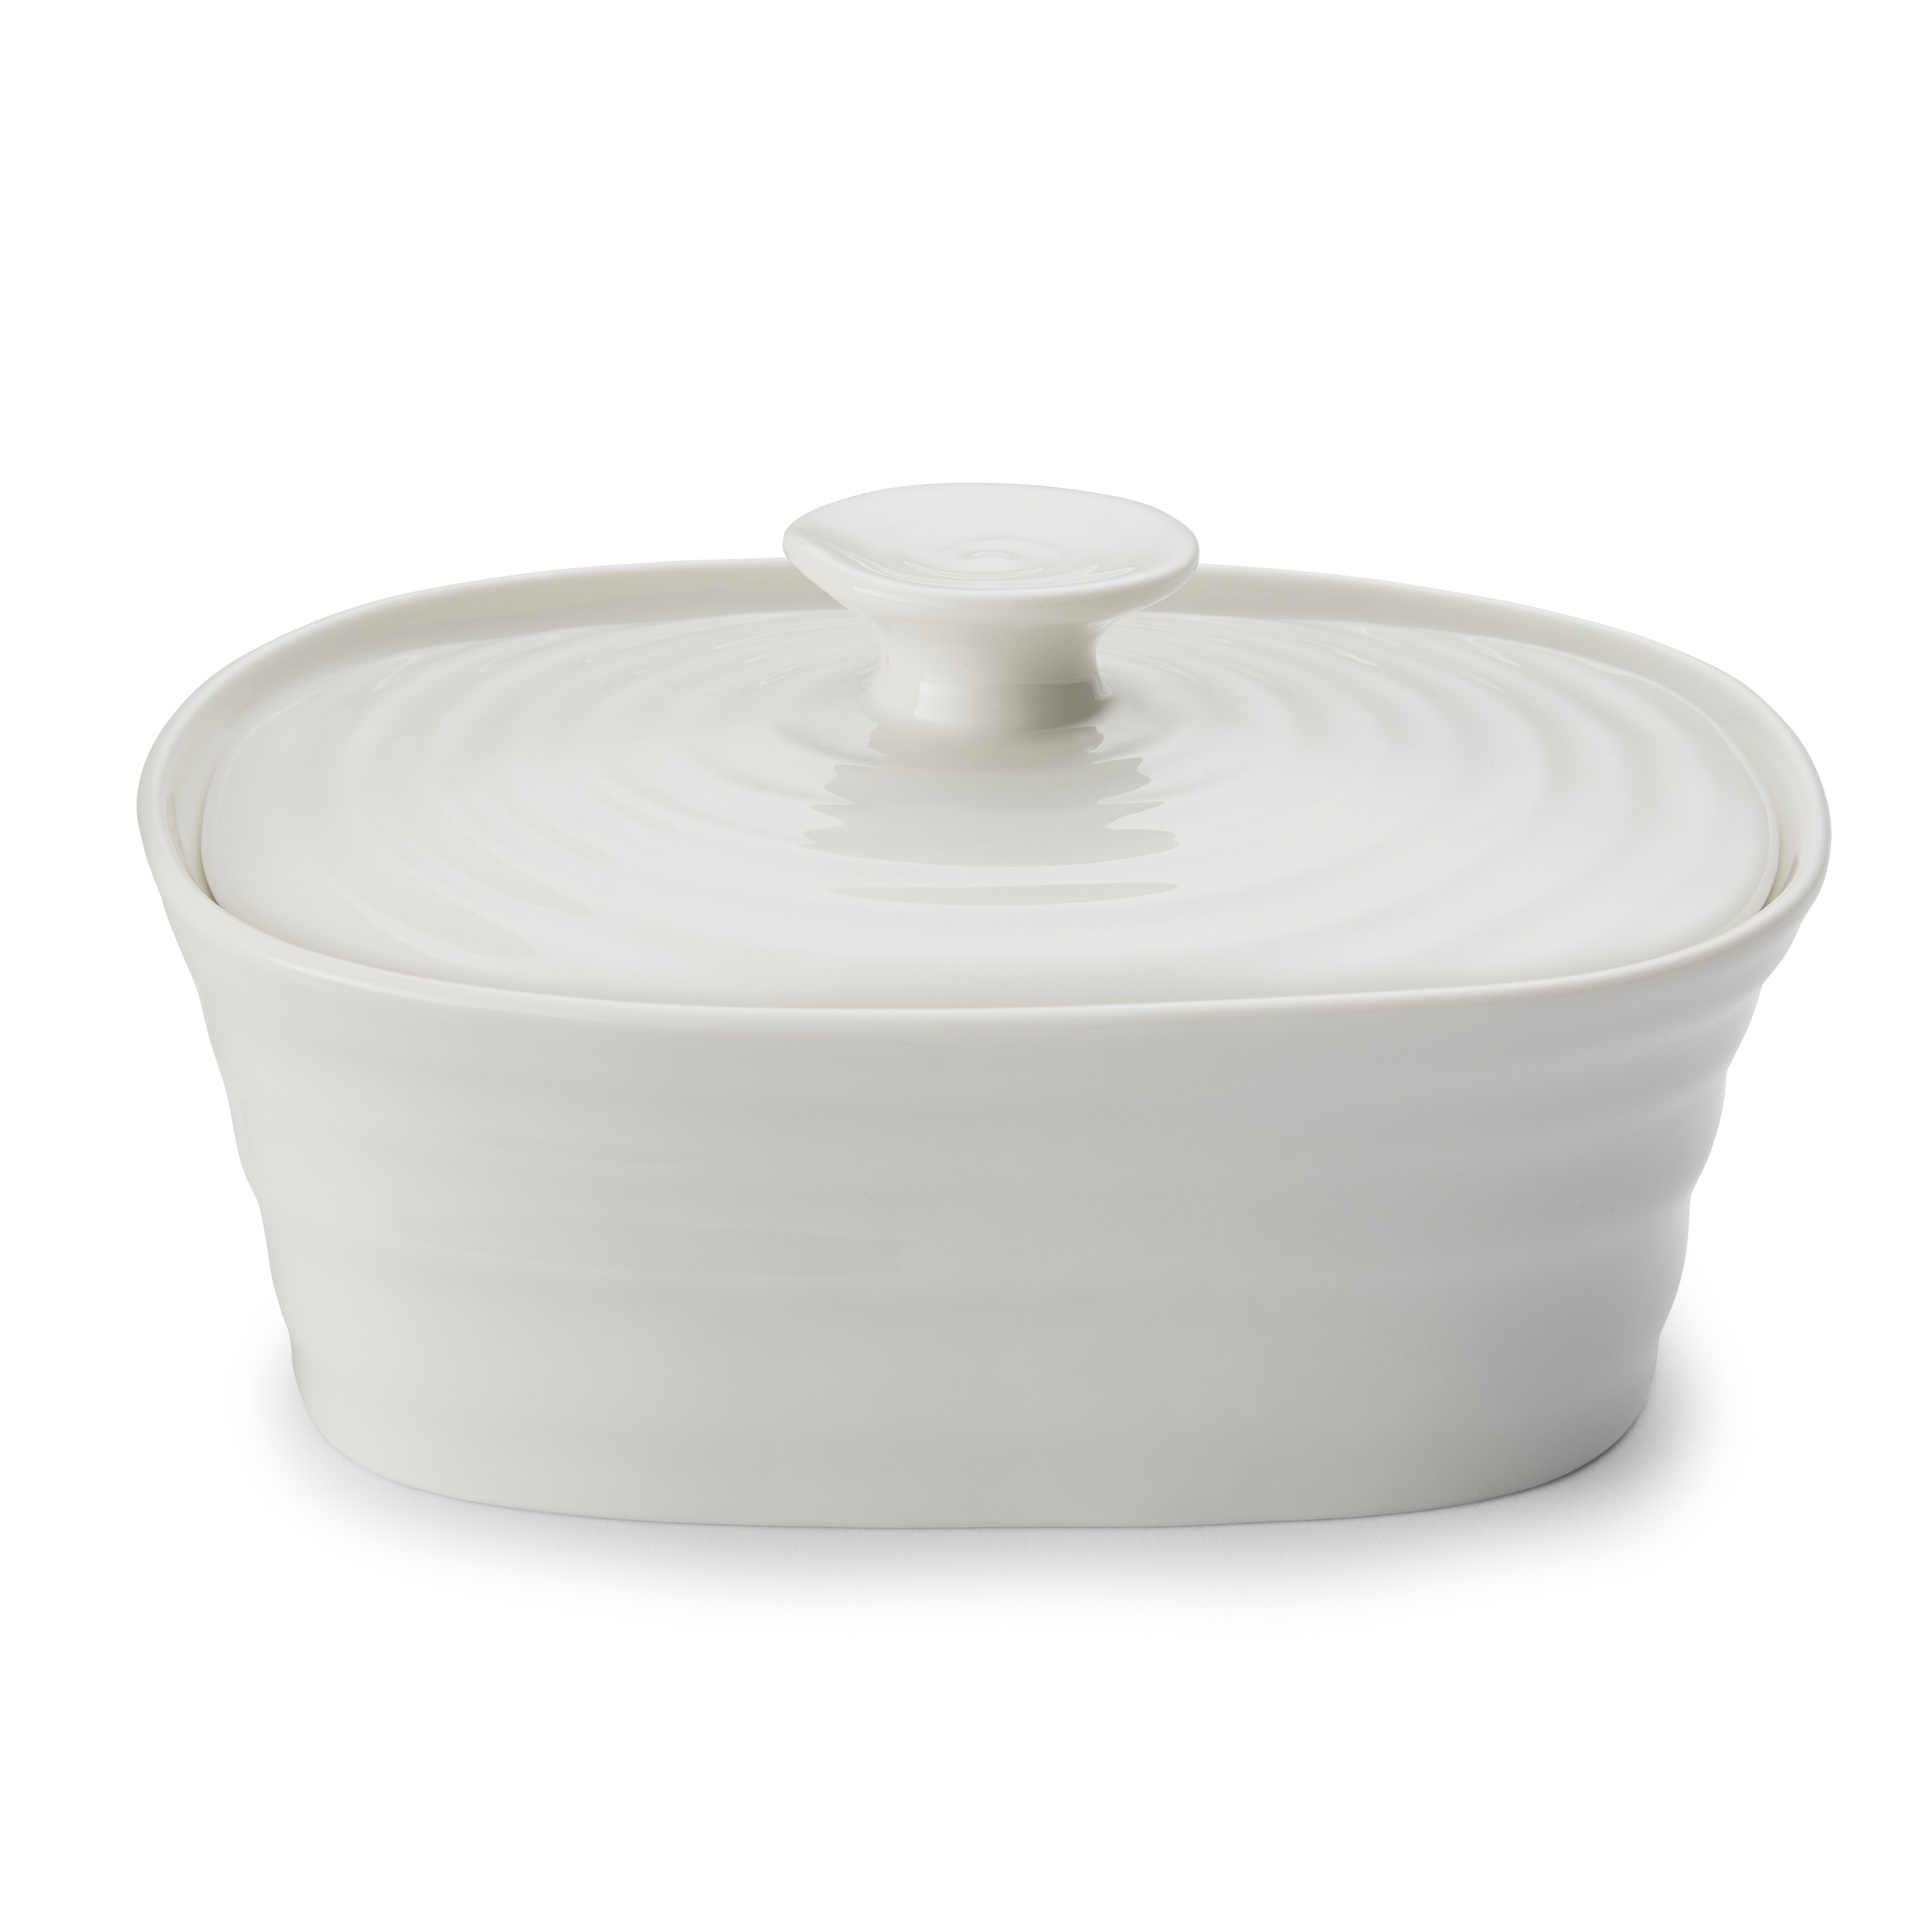 Sophie Conran Covered Butter Dish, White image number null